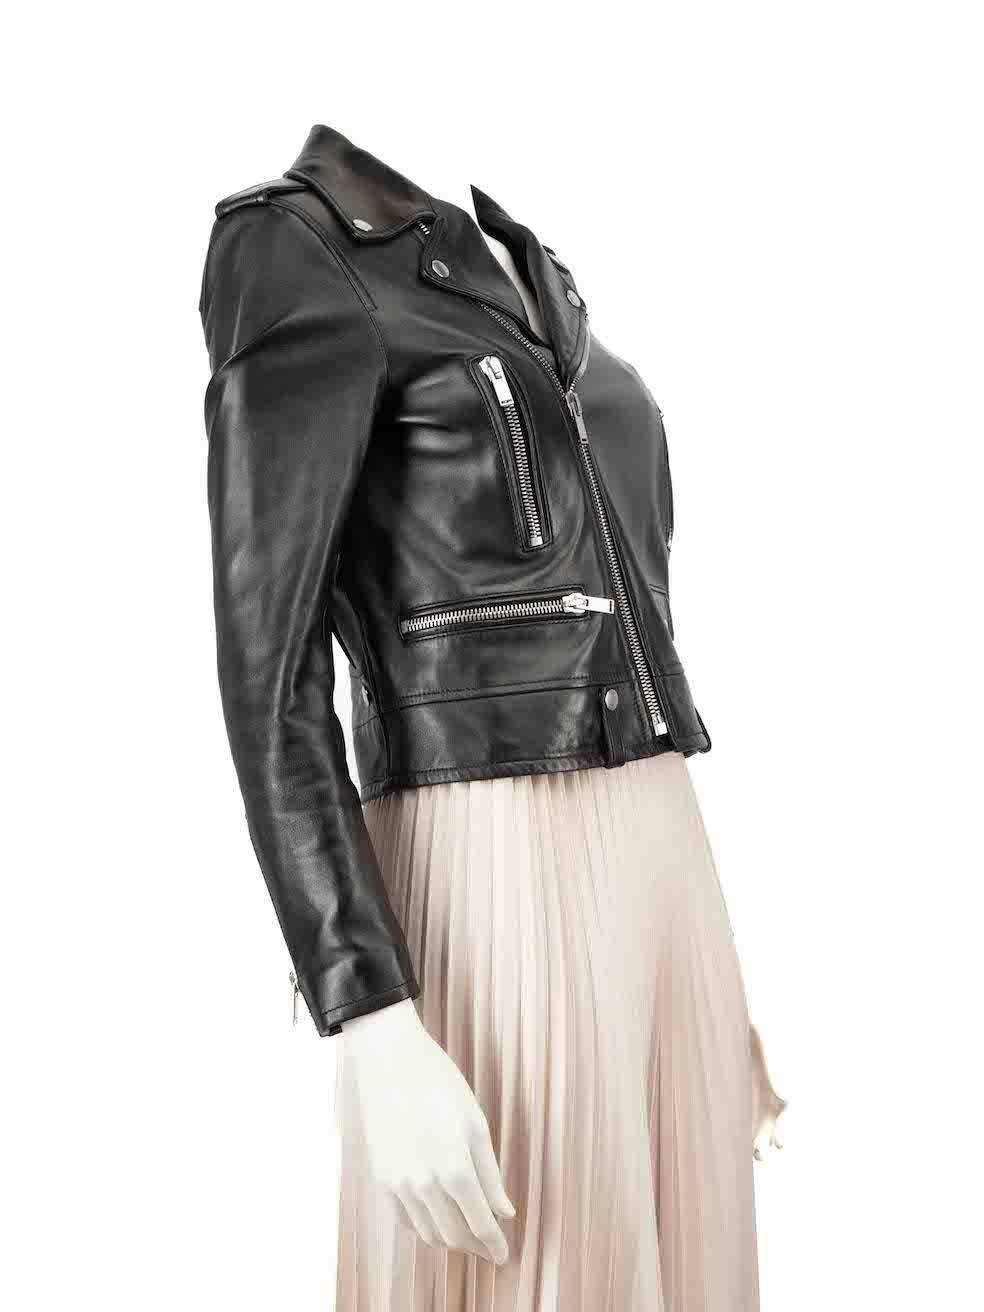 CONDITION is Very good. Minimal wear to the jacket is evident. Minimal abrasion on both cuffs on this used Saint Laurent designer resale item.
 
 
 
 Details
 
 
 Black
 
 Leather
 
 Biker jacket
 
 Snap button collar
 
 Zipped cuffs
 
 Zip